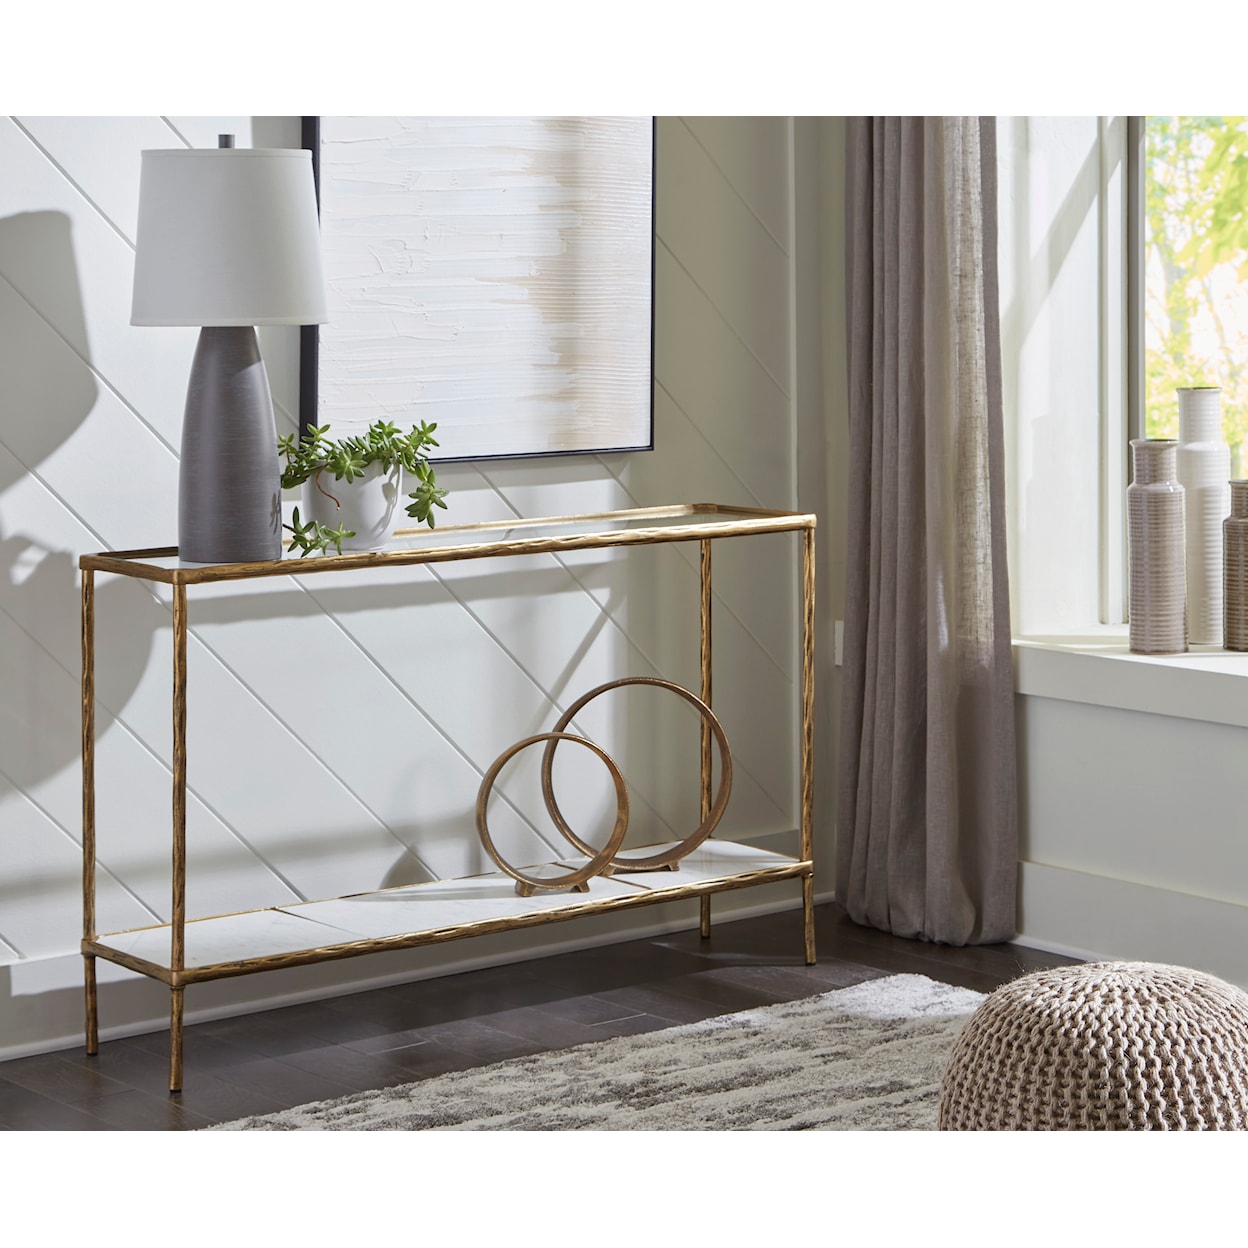 Benchcraft Ryandale Console Sofa Table